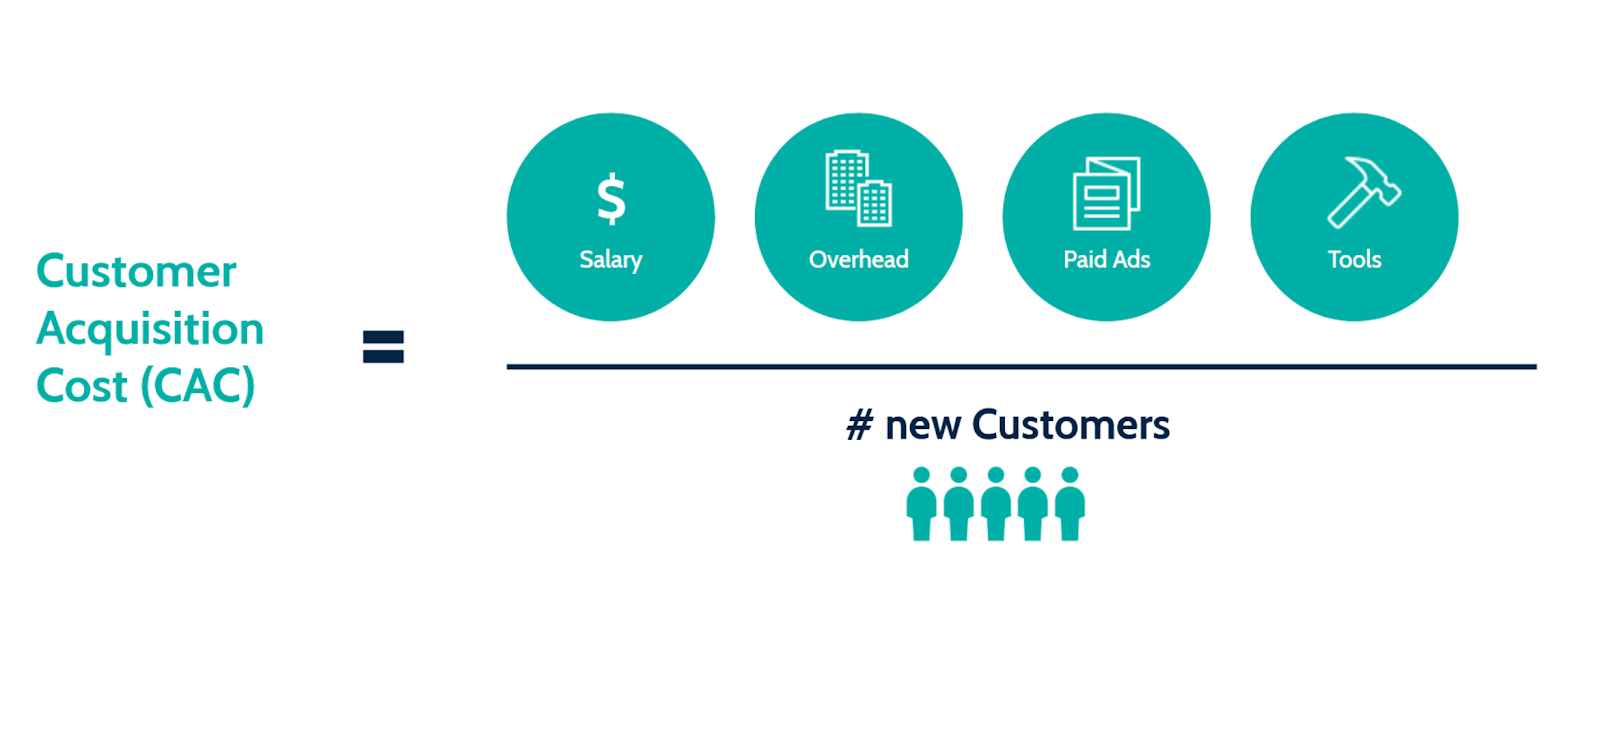 How to Calculate Customer Acquisition Cost (CAC)